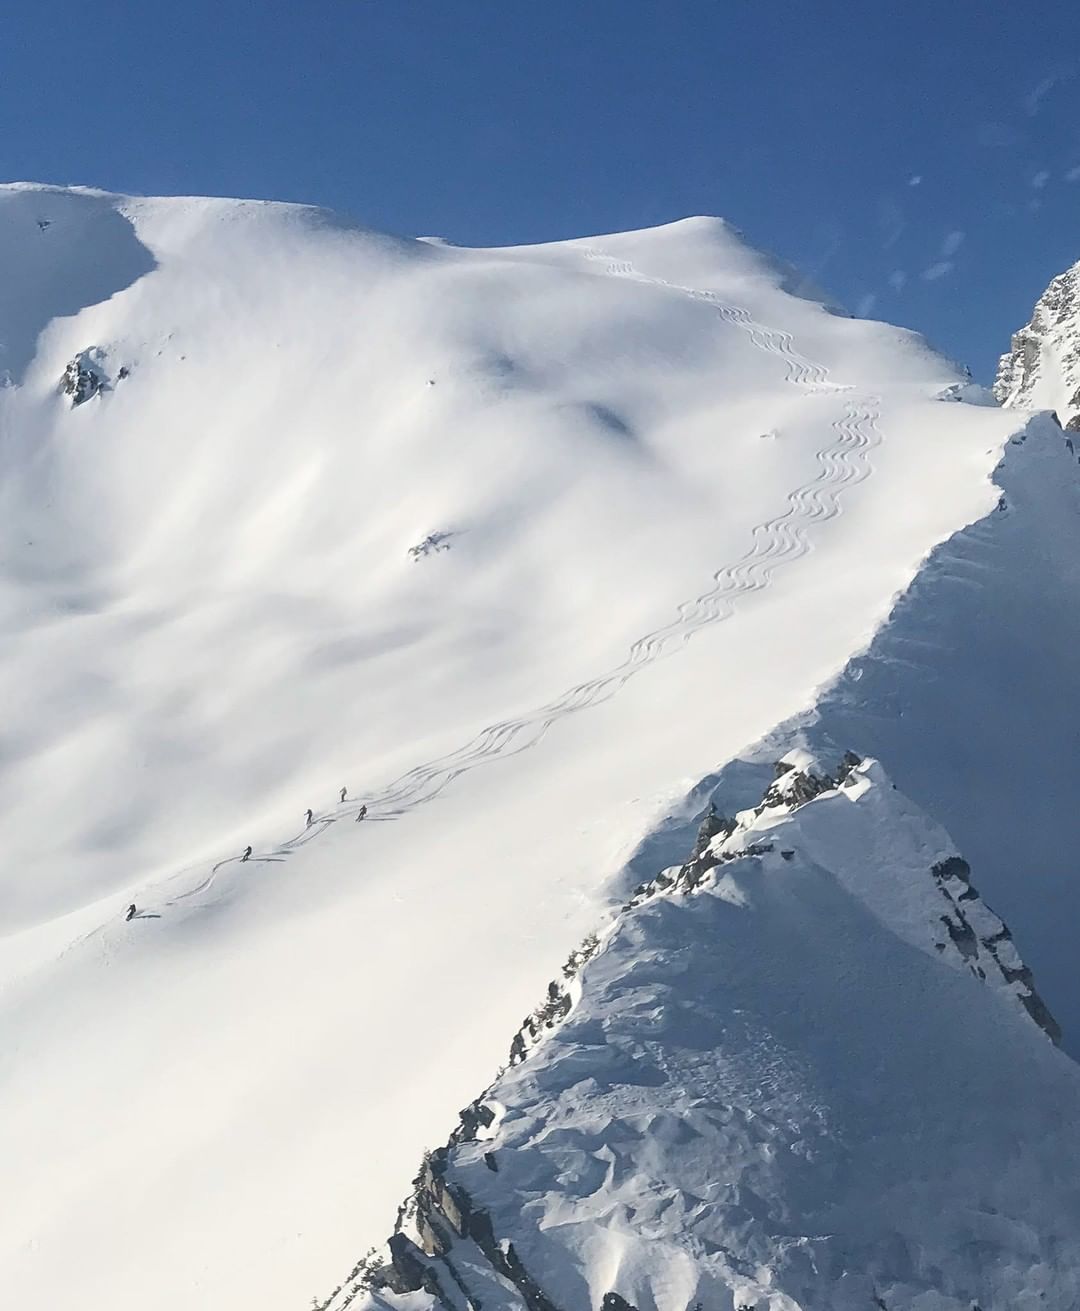 Aerial view of skiiers and ski tracks coming down a white mountainside